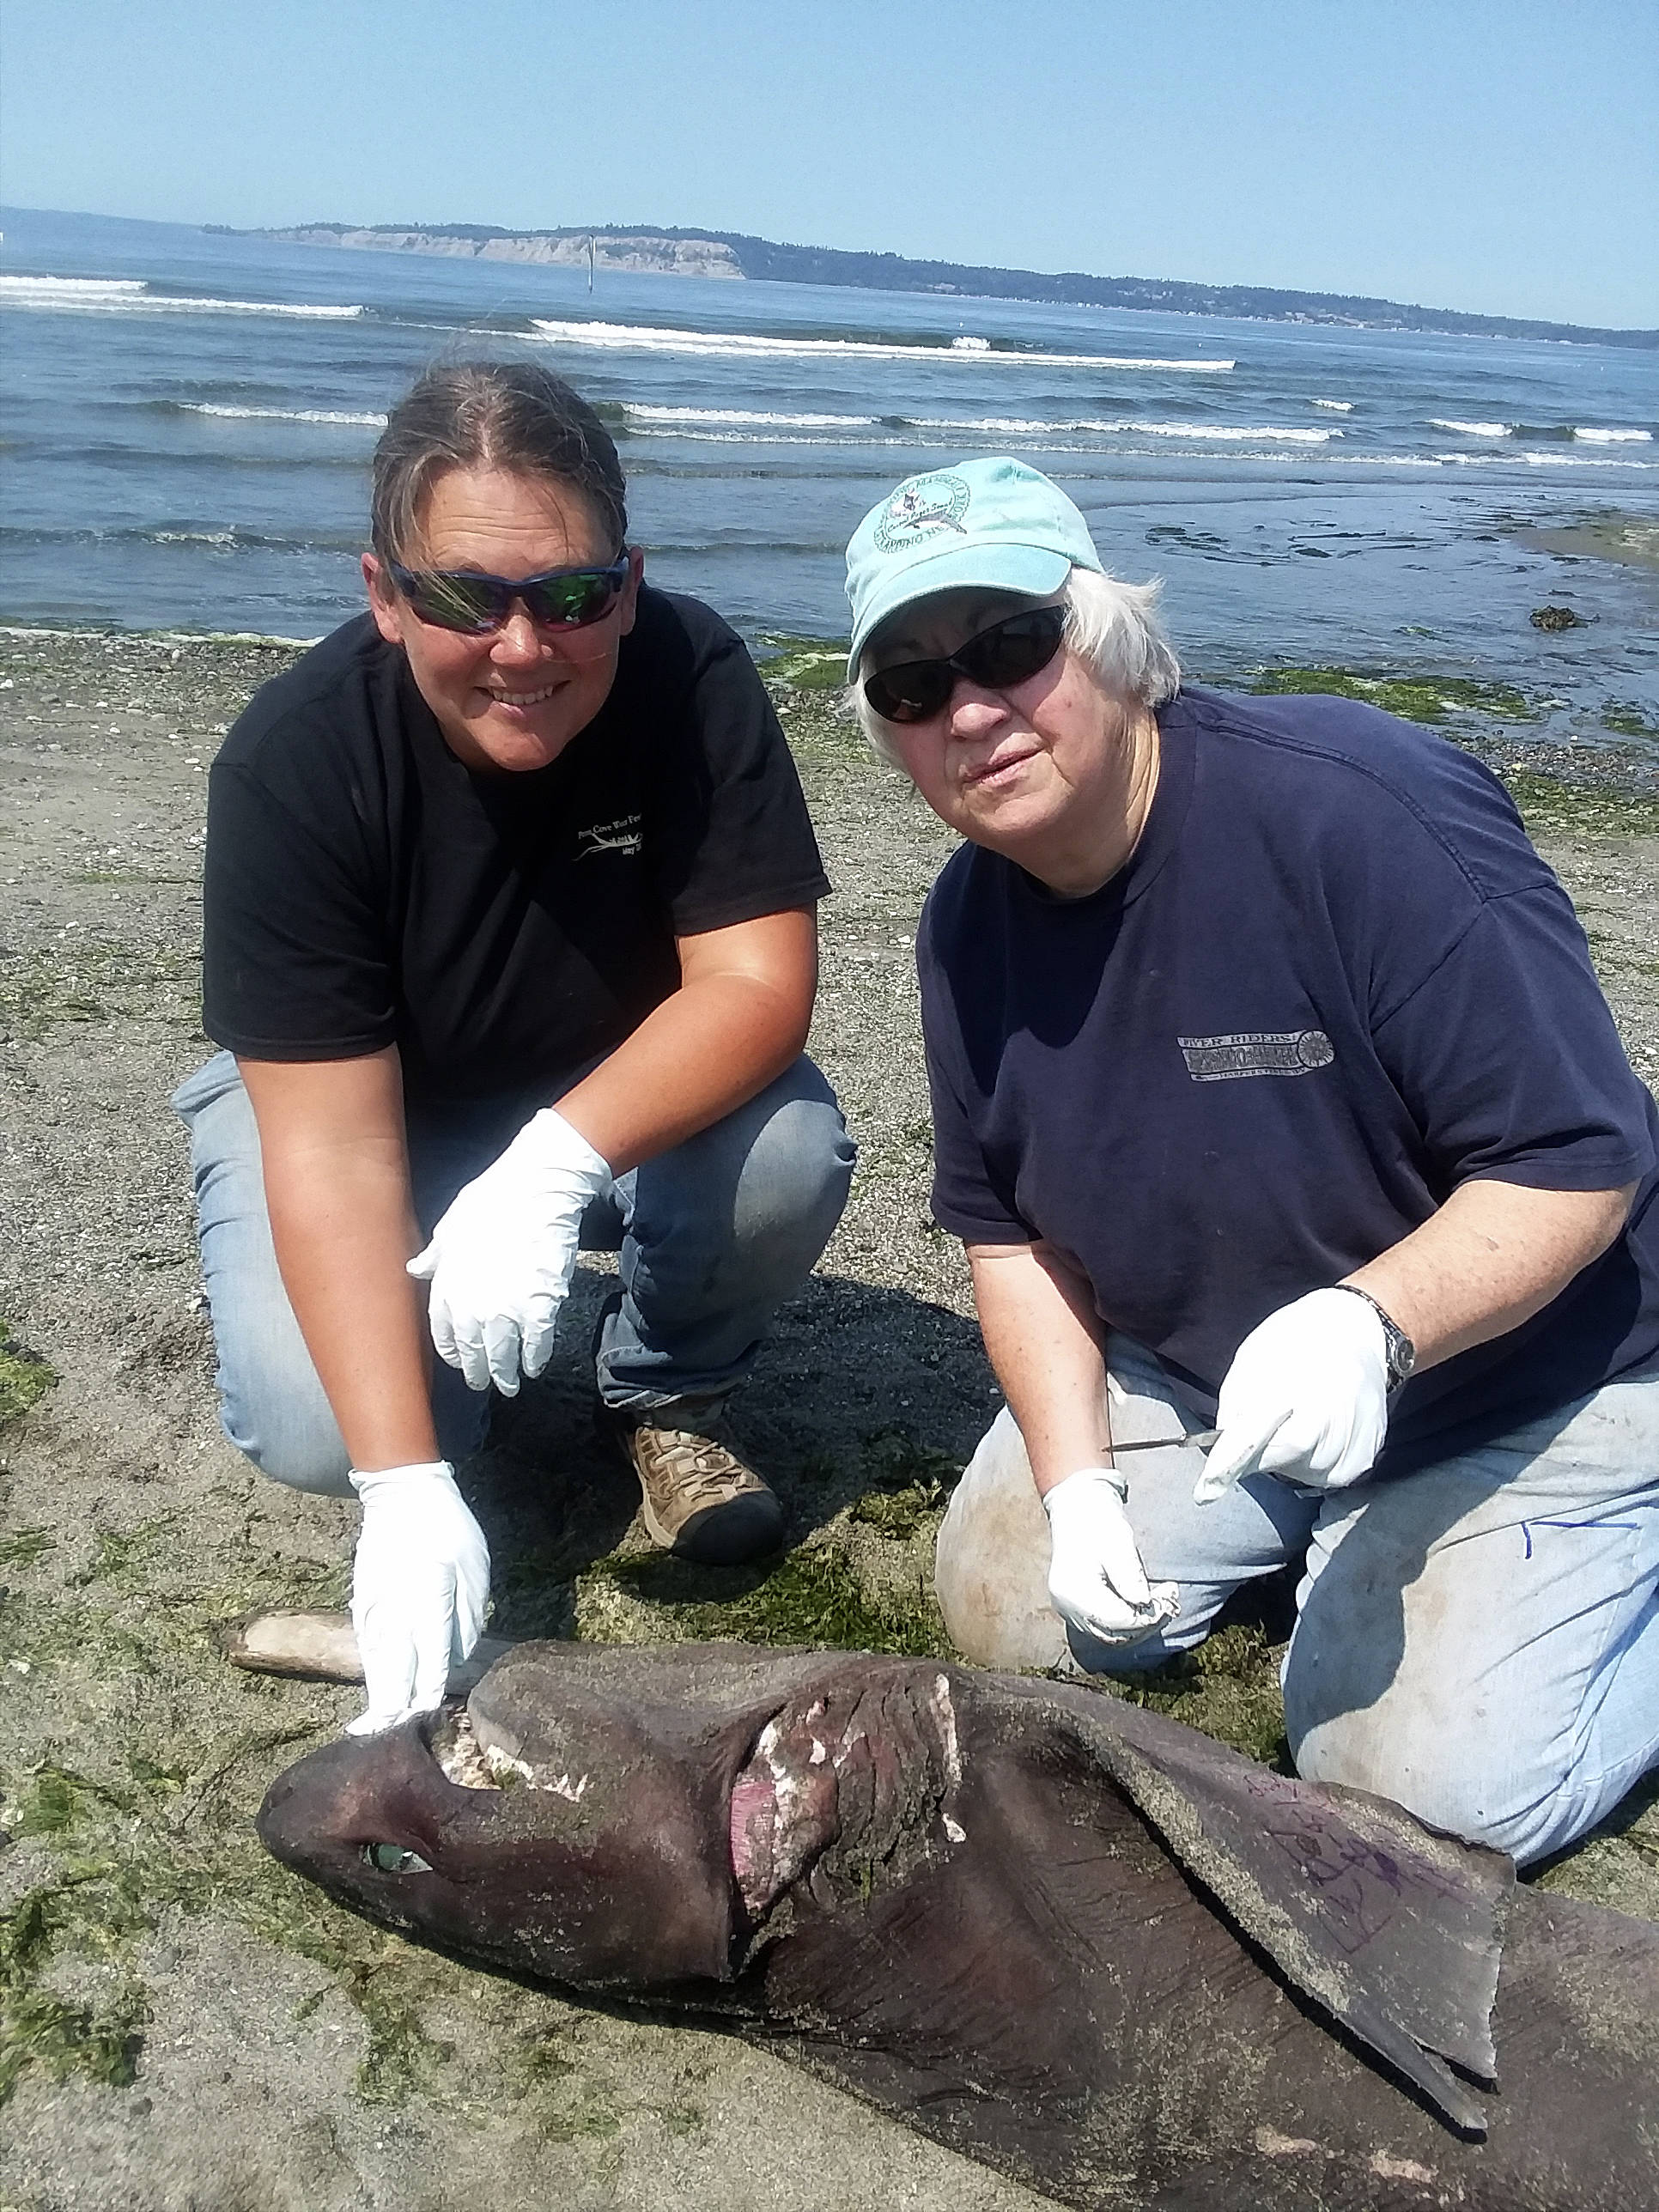 Allie Hudec and Kathy Fritts look over a juvenile sixgill shark found Wednesday morning on Maxwelton Beach in South Whidbey. They volunteer with Central Puget Sound Marine Mammal Stranding Network that also responds to unusual washed-up big fish and other creatures. (Photo provided)